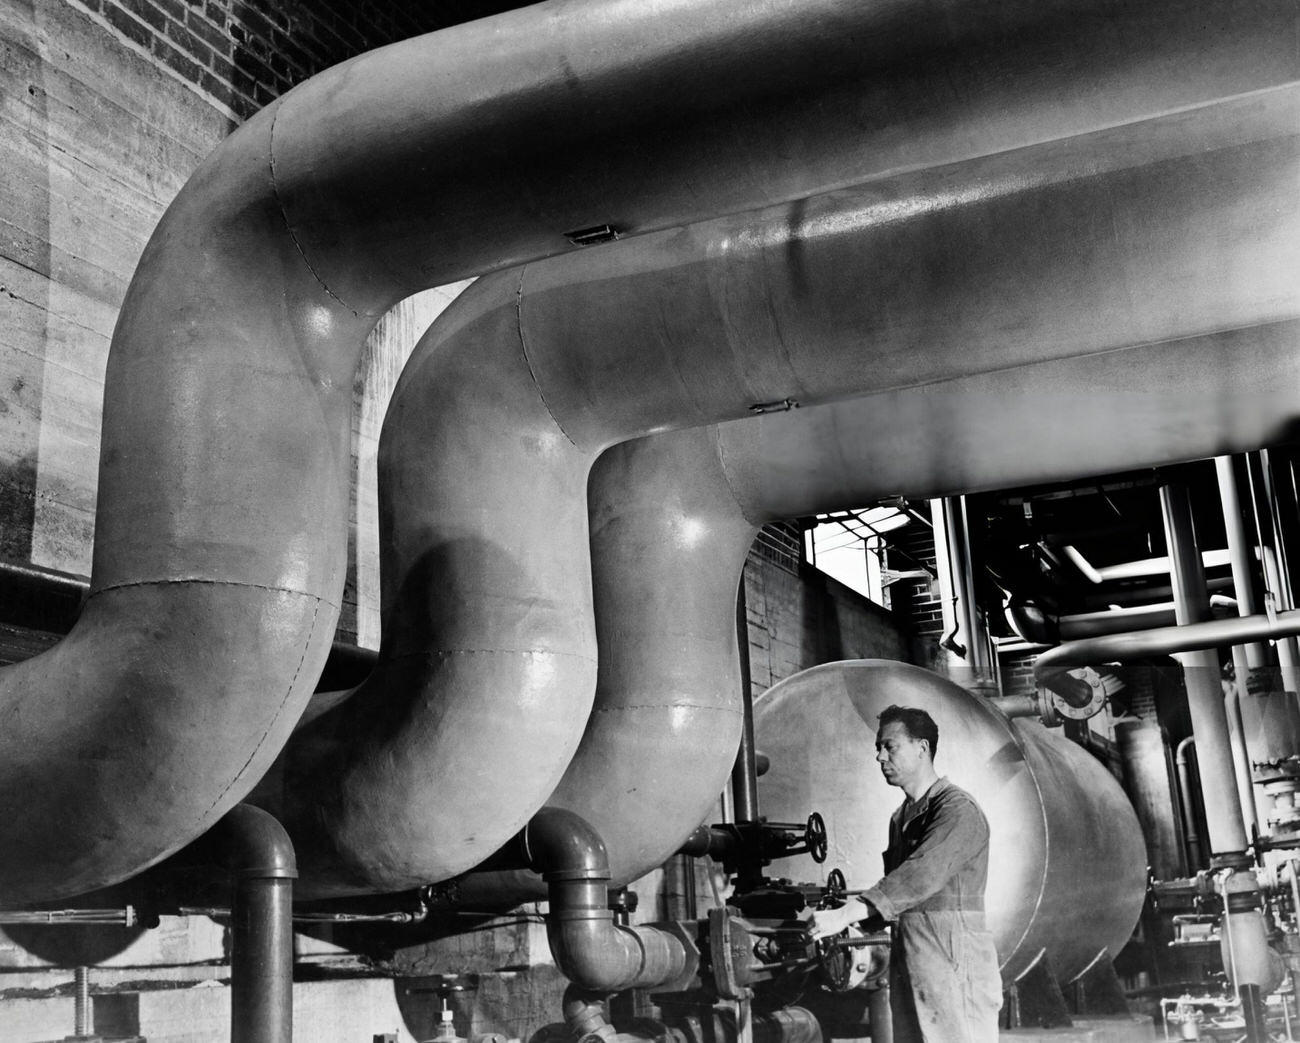 A Heating Engineer Inspects Pipes Carrying Steam To The Parkchester Housing Development In The Bronx, 1955.